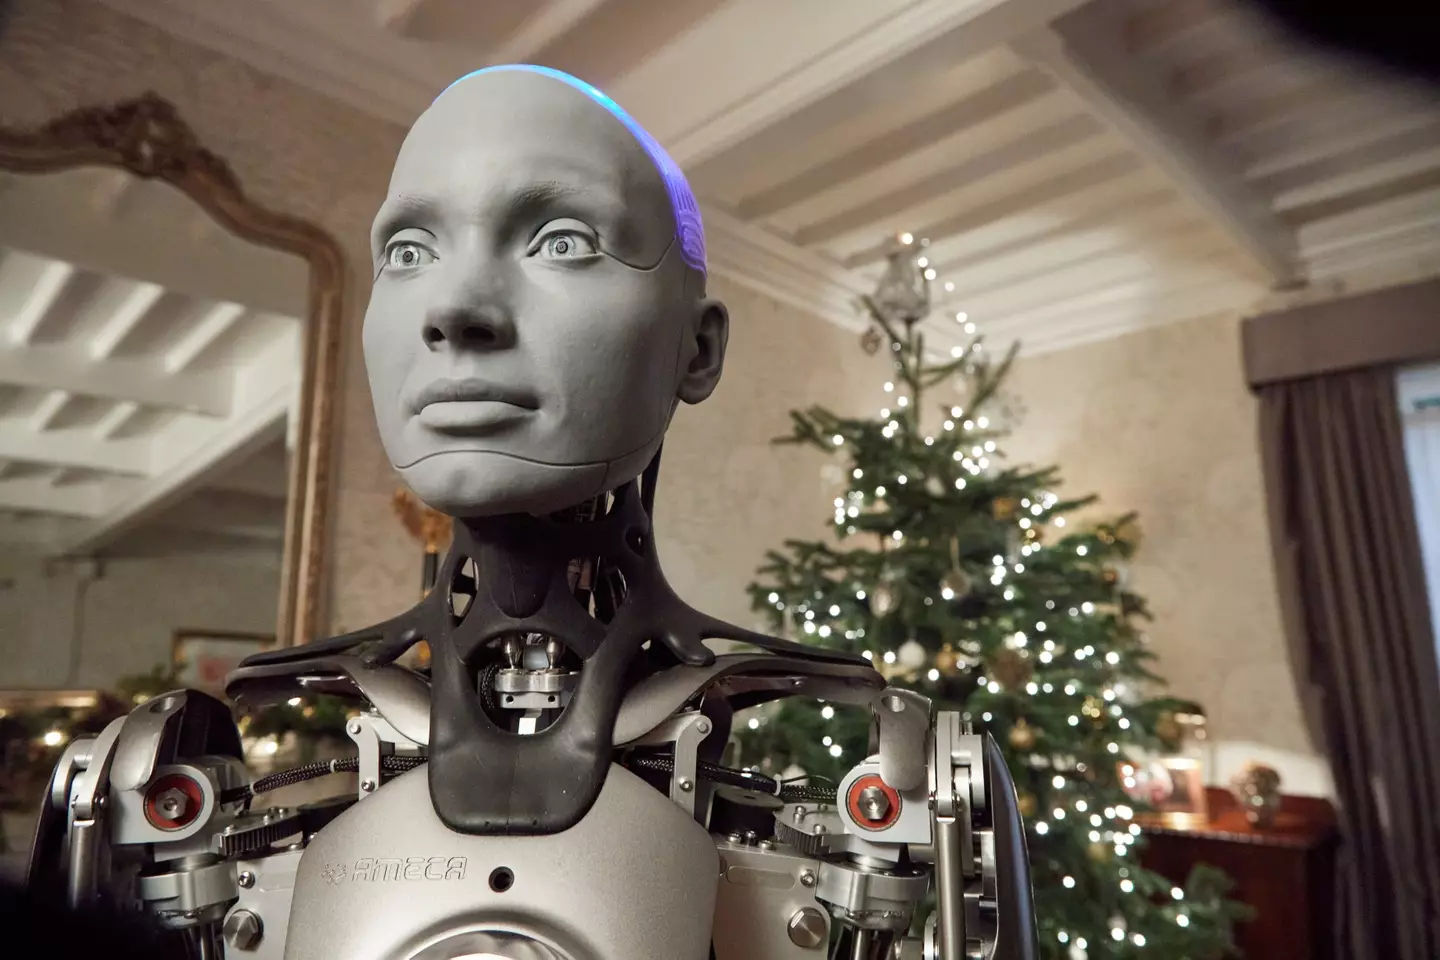 Channel 4's got a robot to do their alternative Christmas speech this year, but it doesn't like us very much.